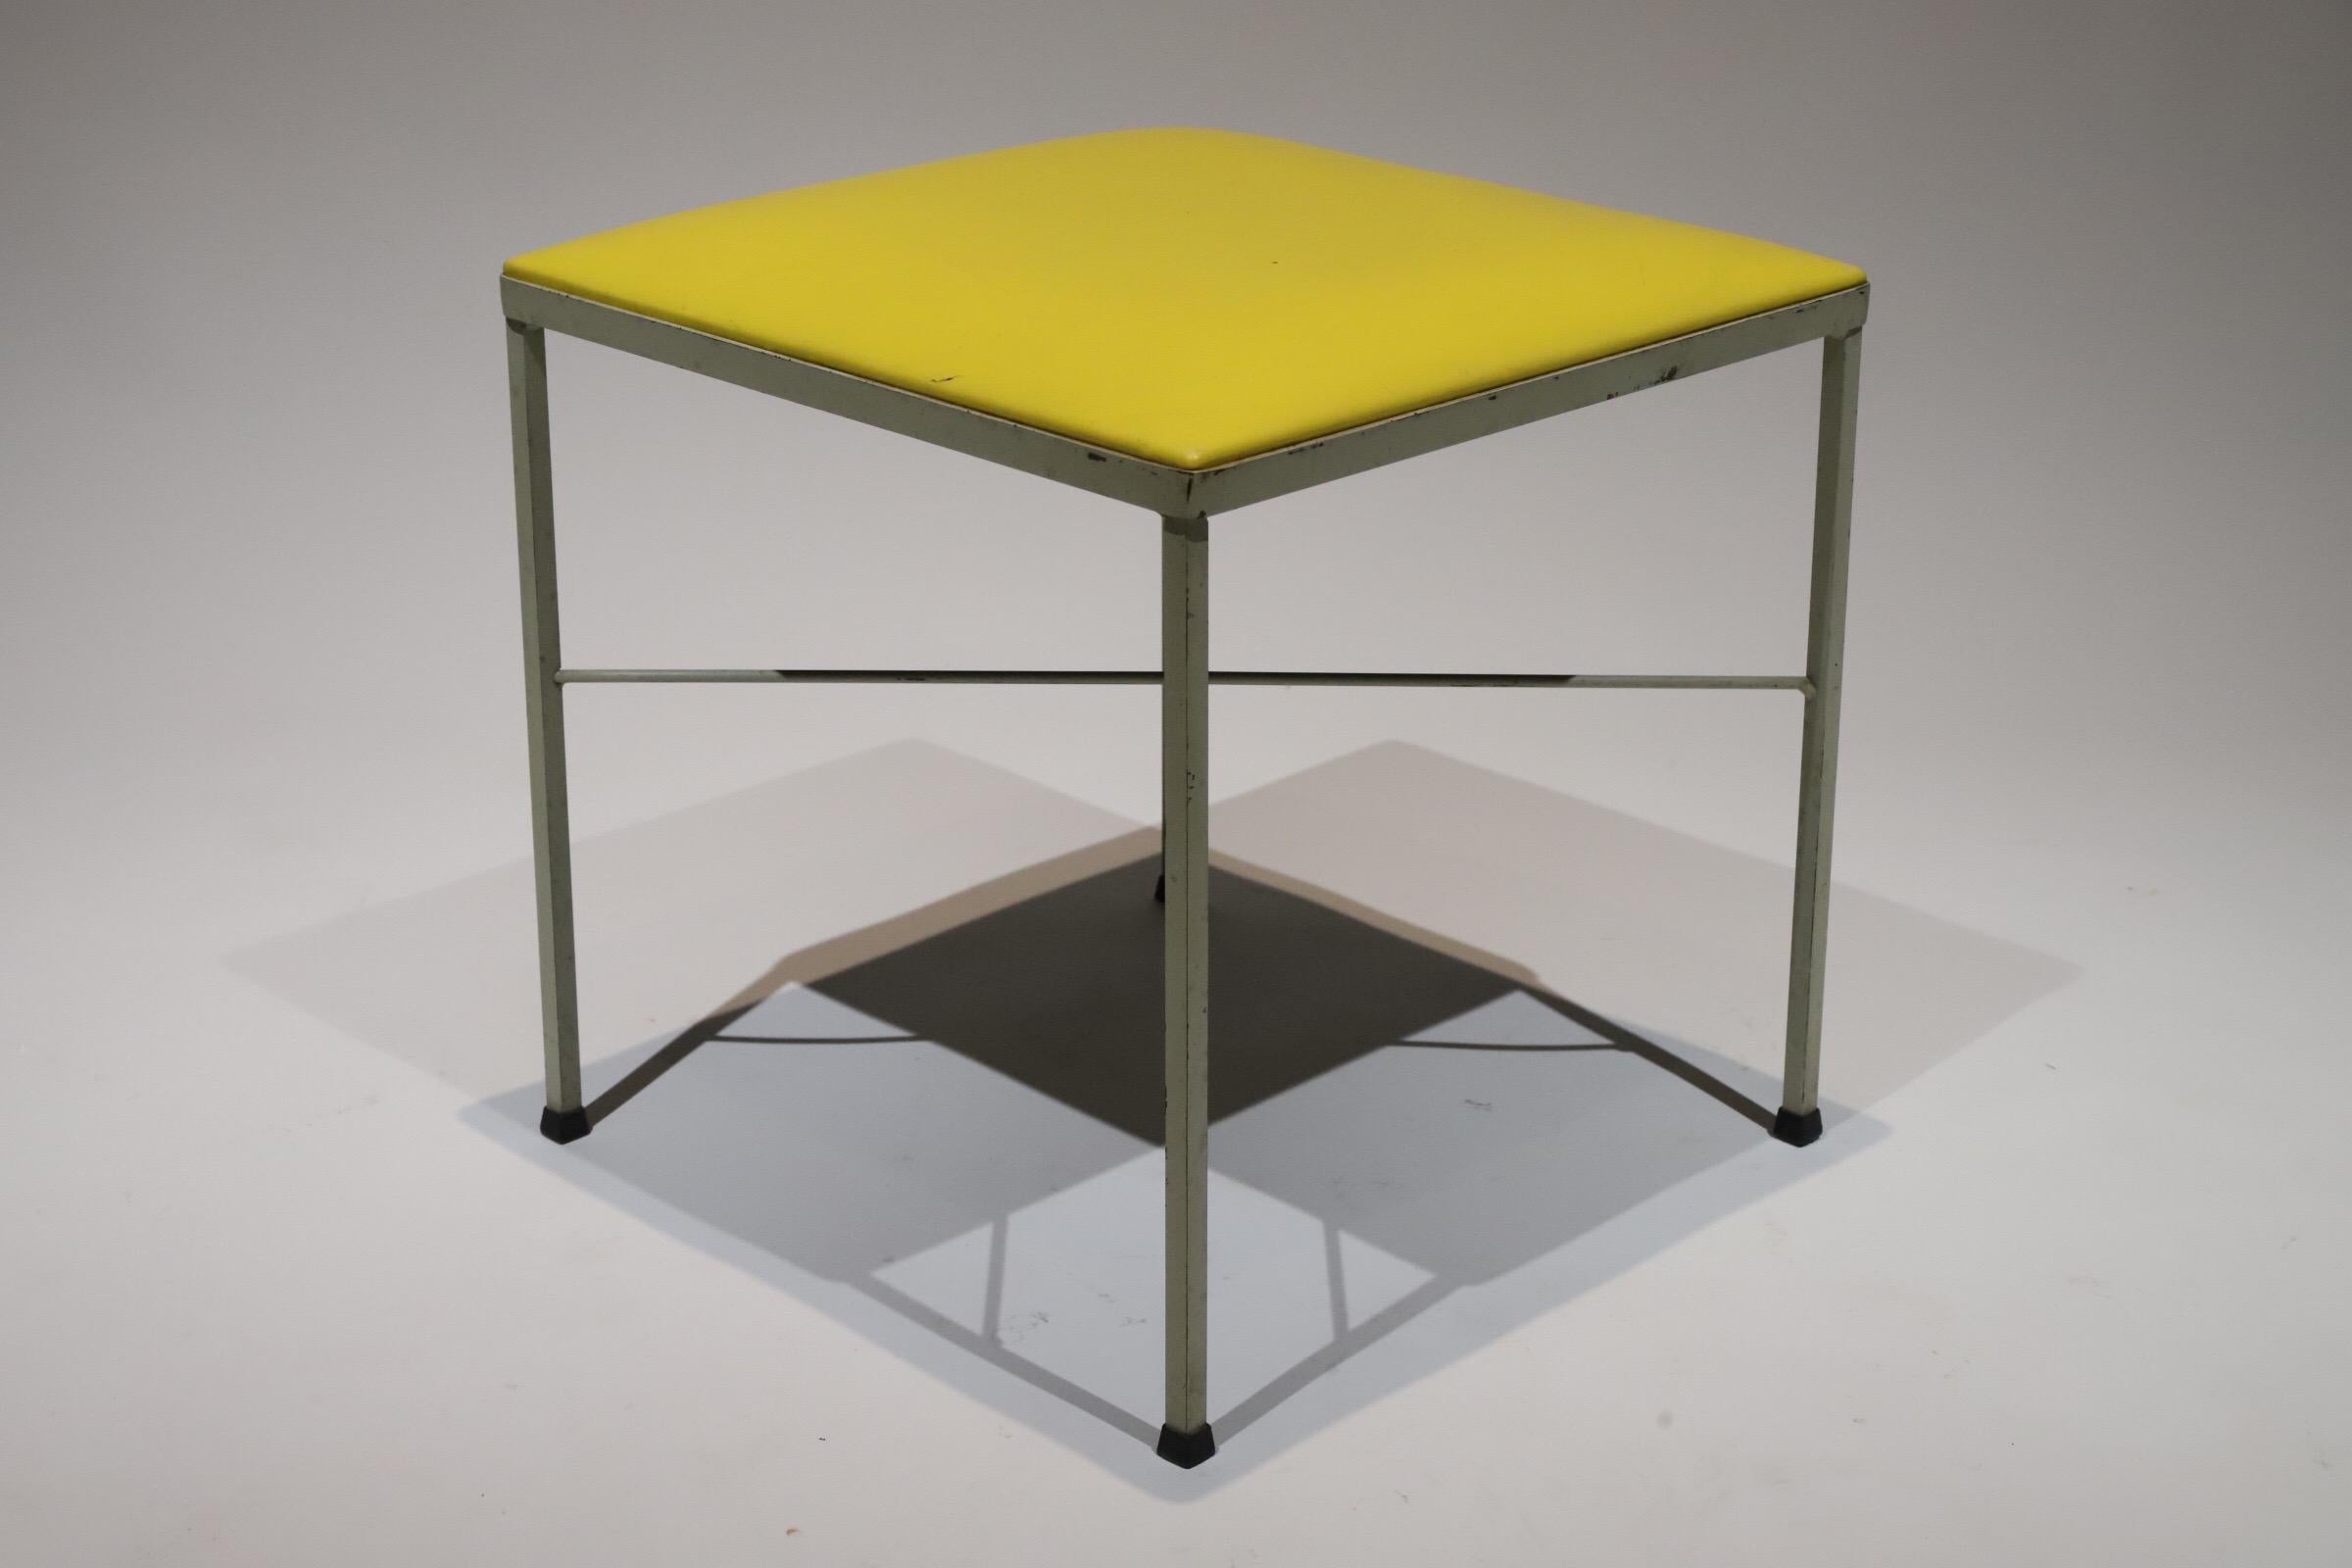 Yellow vinyl covered seat inset in metal base. Makes for a great stool or ottoman. Very much in the style of Paul Mccobb or Frederick Weinberg. Pictured with Knoll wire chair by Harry Bertoia for scale.